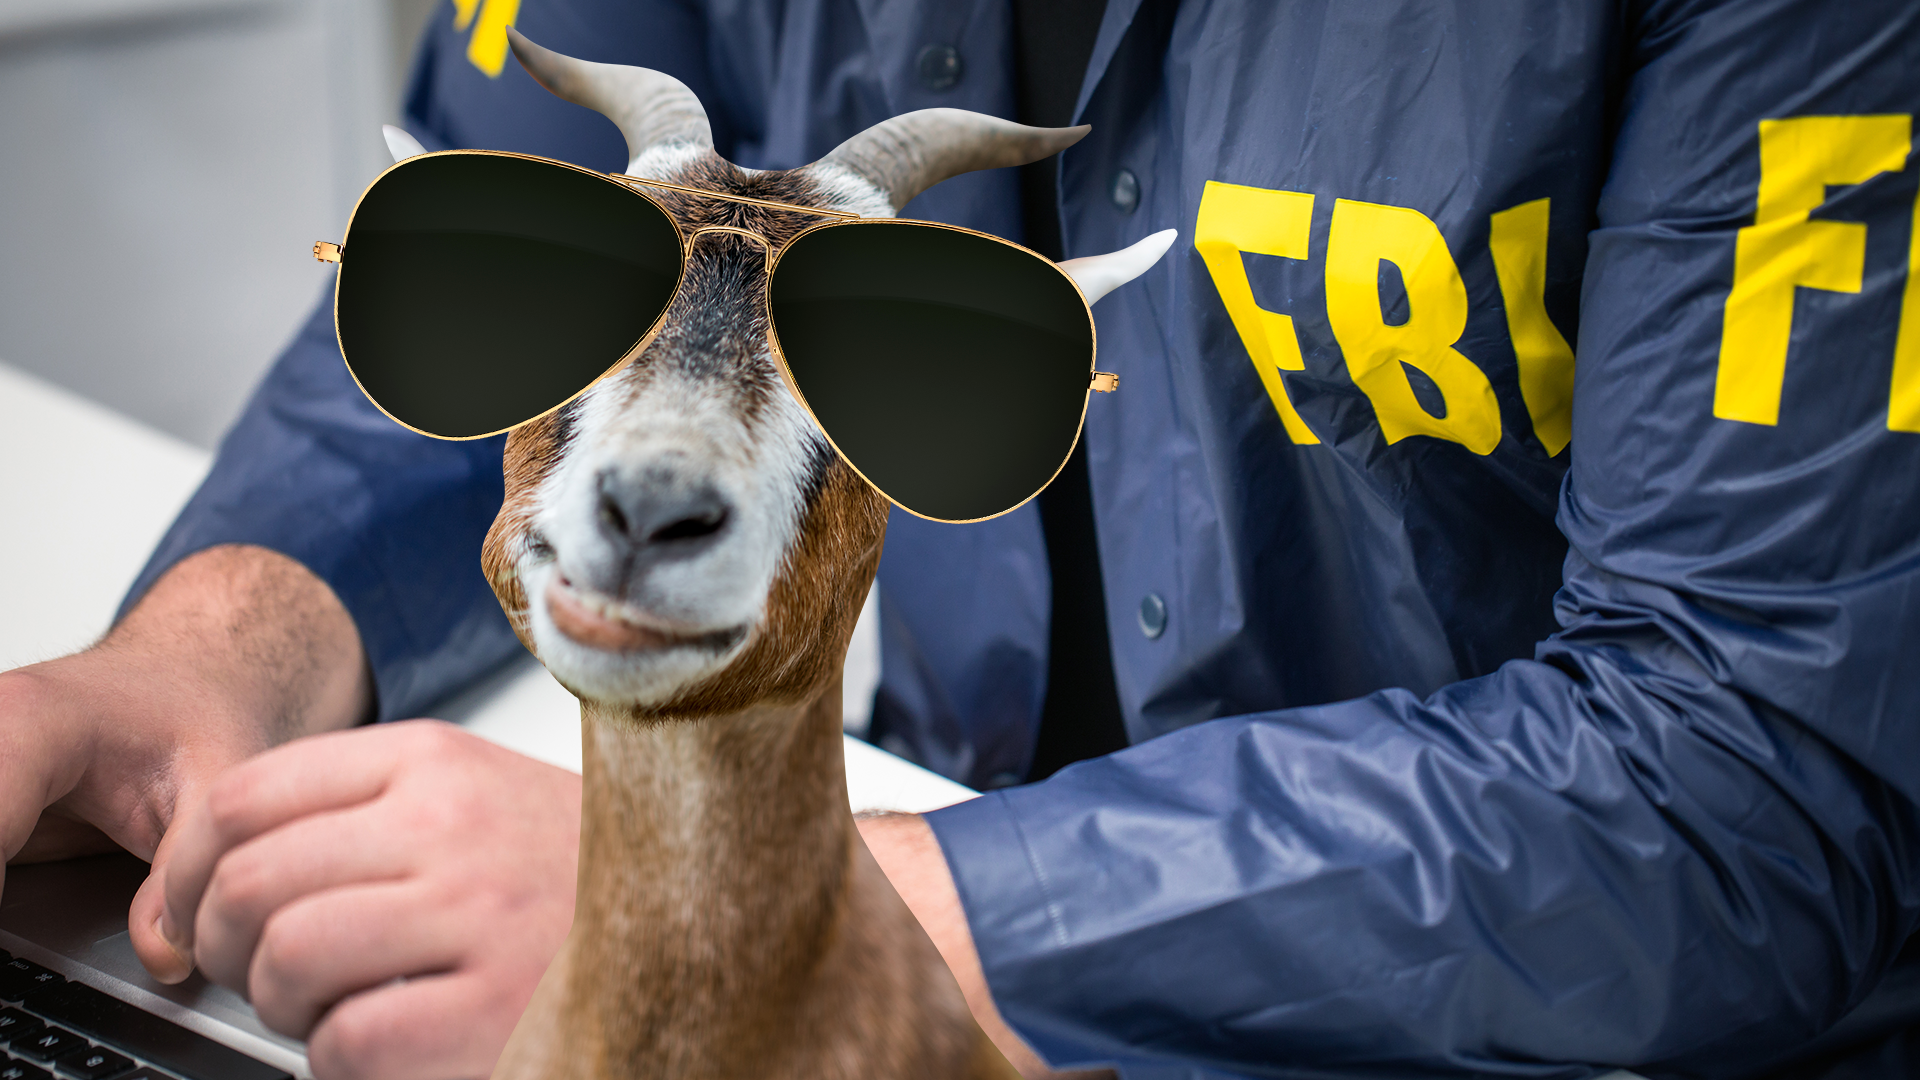 A derpy goat in aviators and an FBI agent